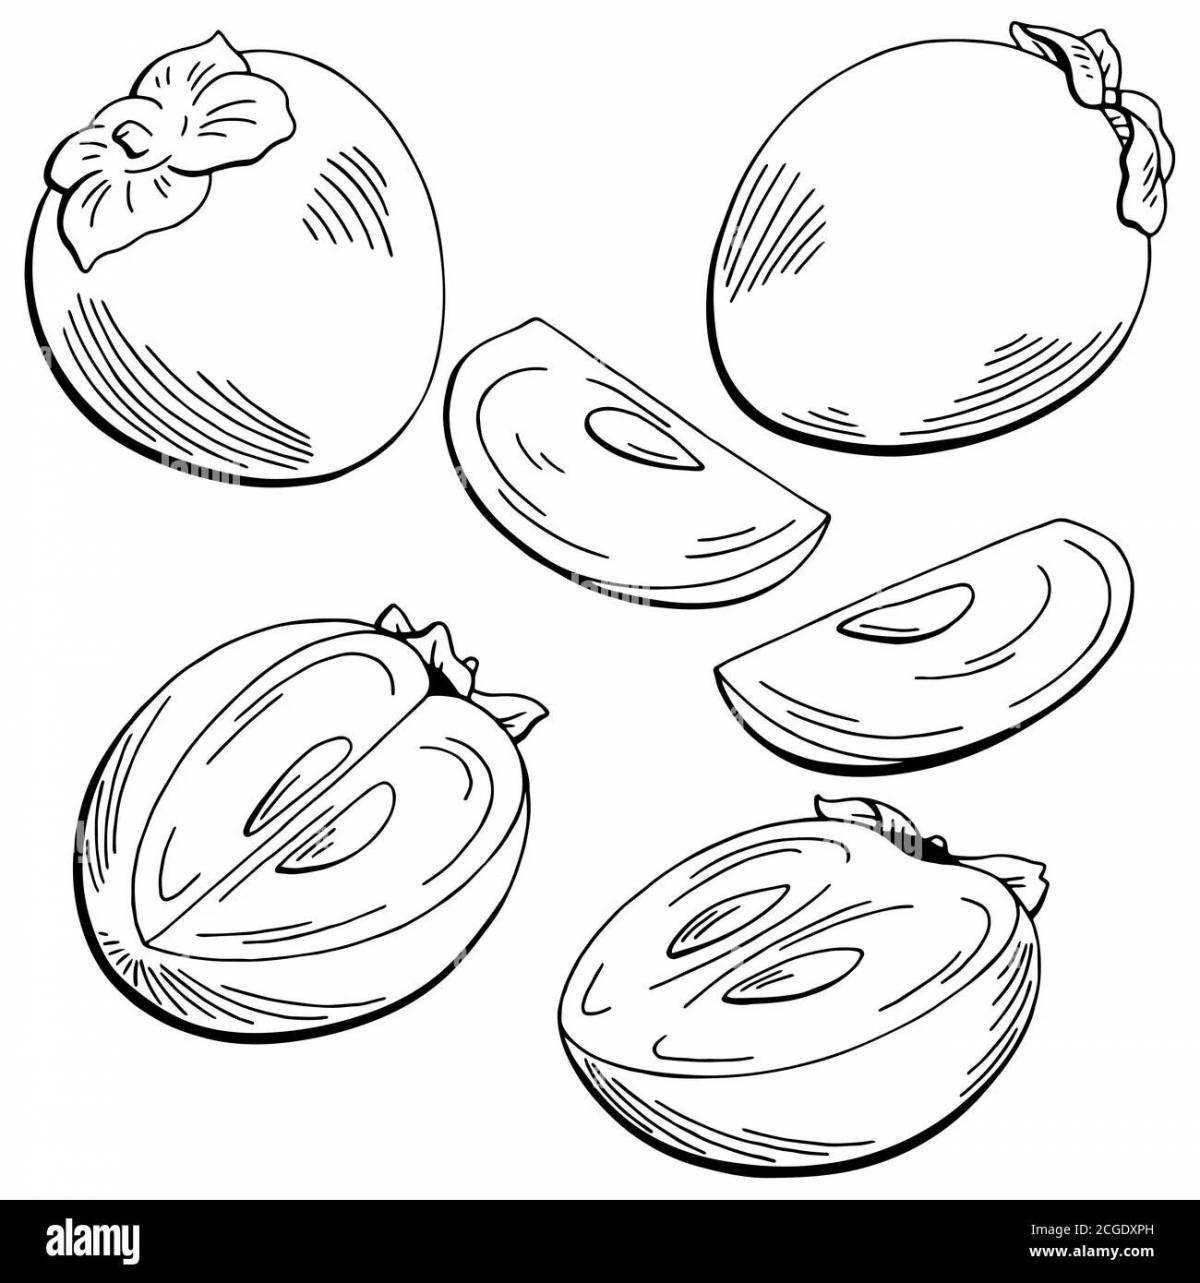 Playful persimmon coloring page for kids